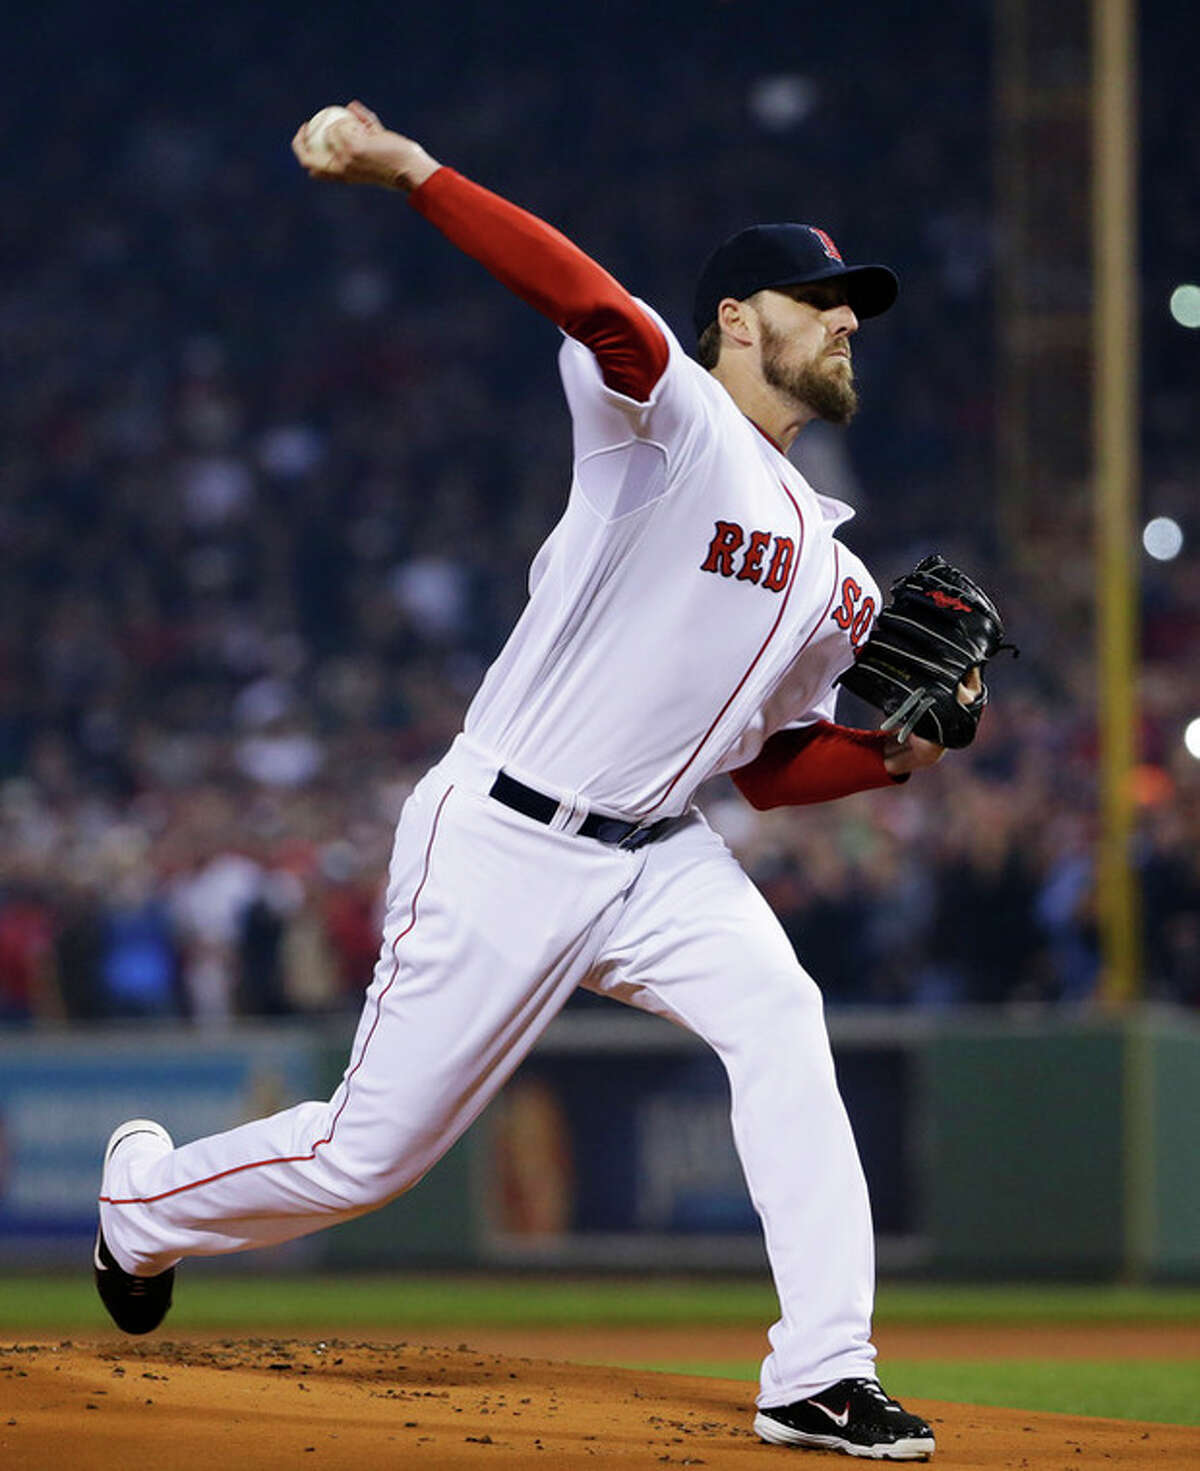 Boston Red Sox starting pitcher John Lackey throws during the first inning of Game 6 of baseball's World Series against the St. Louis Cardinals Wednesday, Oct. 30, 2013, in Boston. (AP Photo/Matt Slocum)